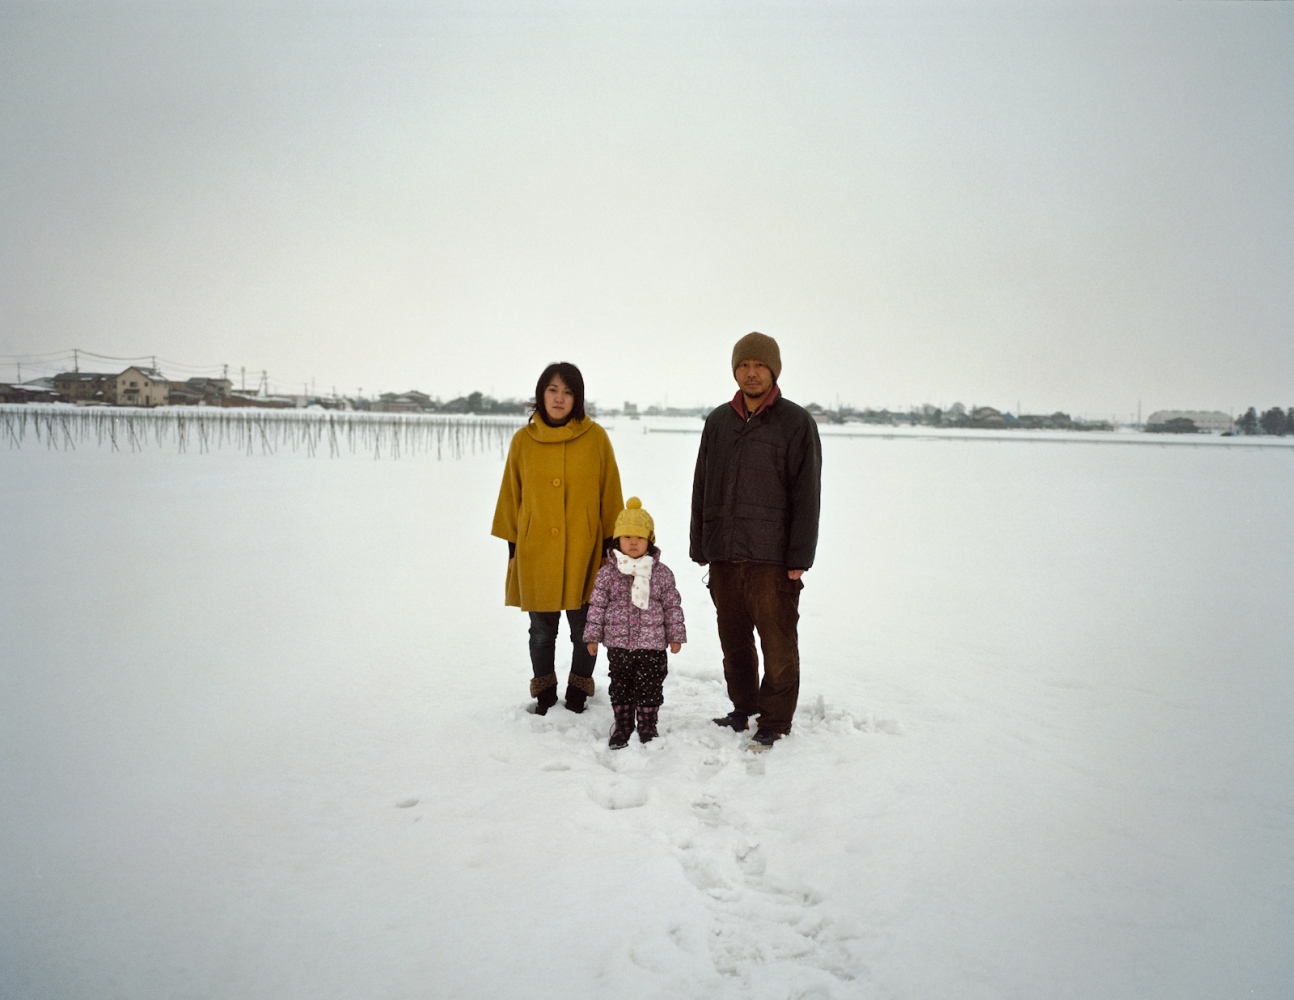  Nozaki and his family stand for a portrait in a snow covered vegetable field in the town of Aizuwakamatsu, Fukushima Prefecture. Nozaki and his wife are not overly concerned about radiation contaminating food and water, but how discrimination will impact the future for their 4 year-old daughter. Feb. 2014 